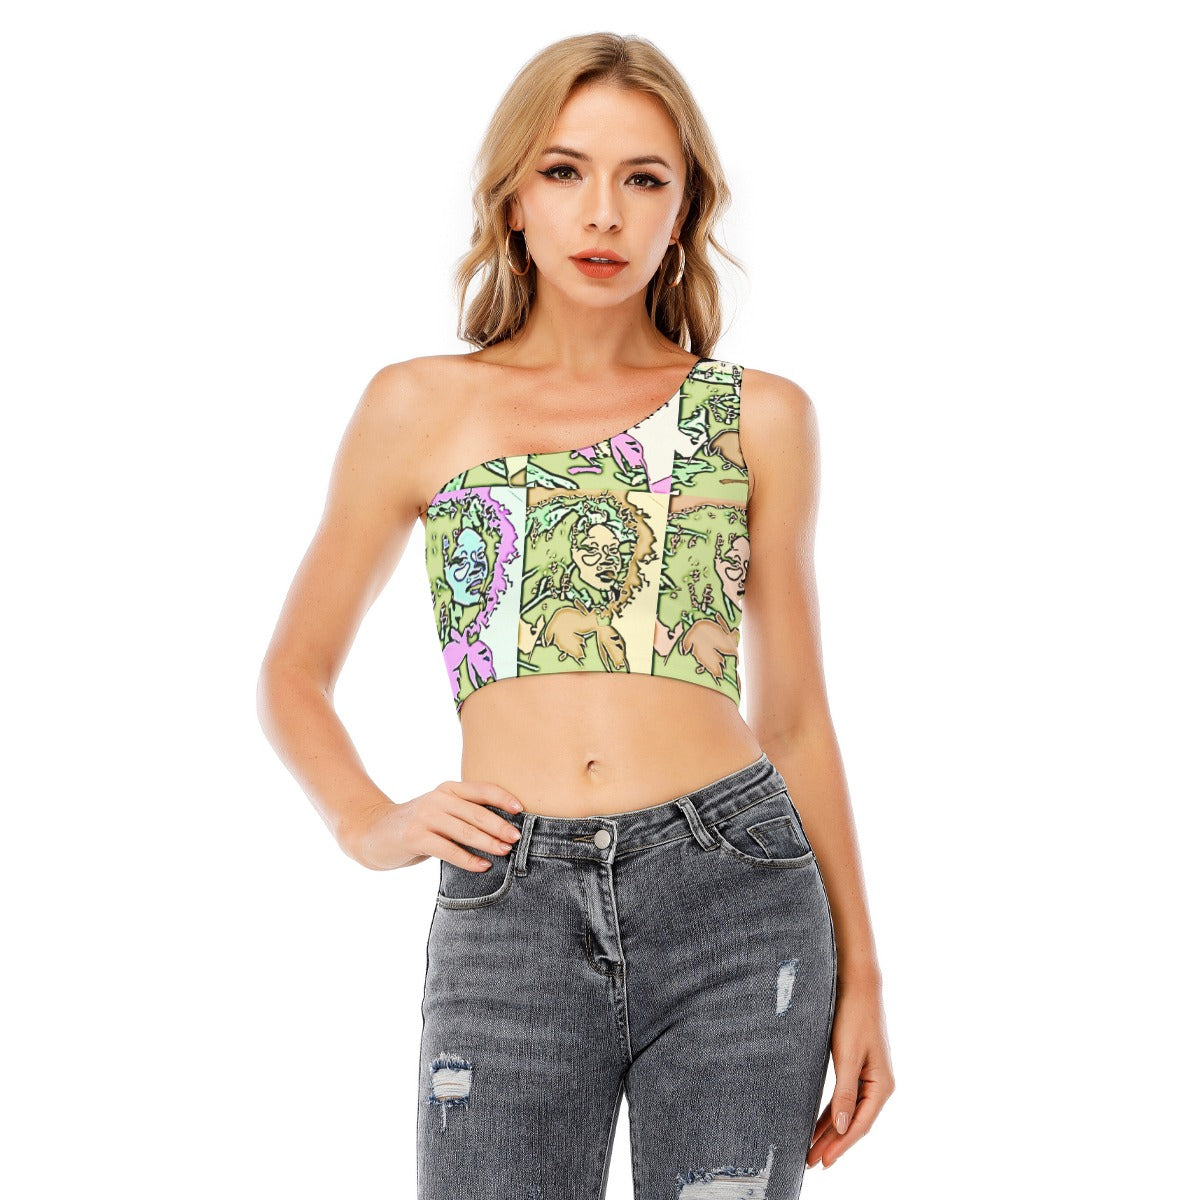 Afro One-Shoulder Cropped Top